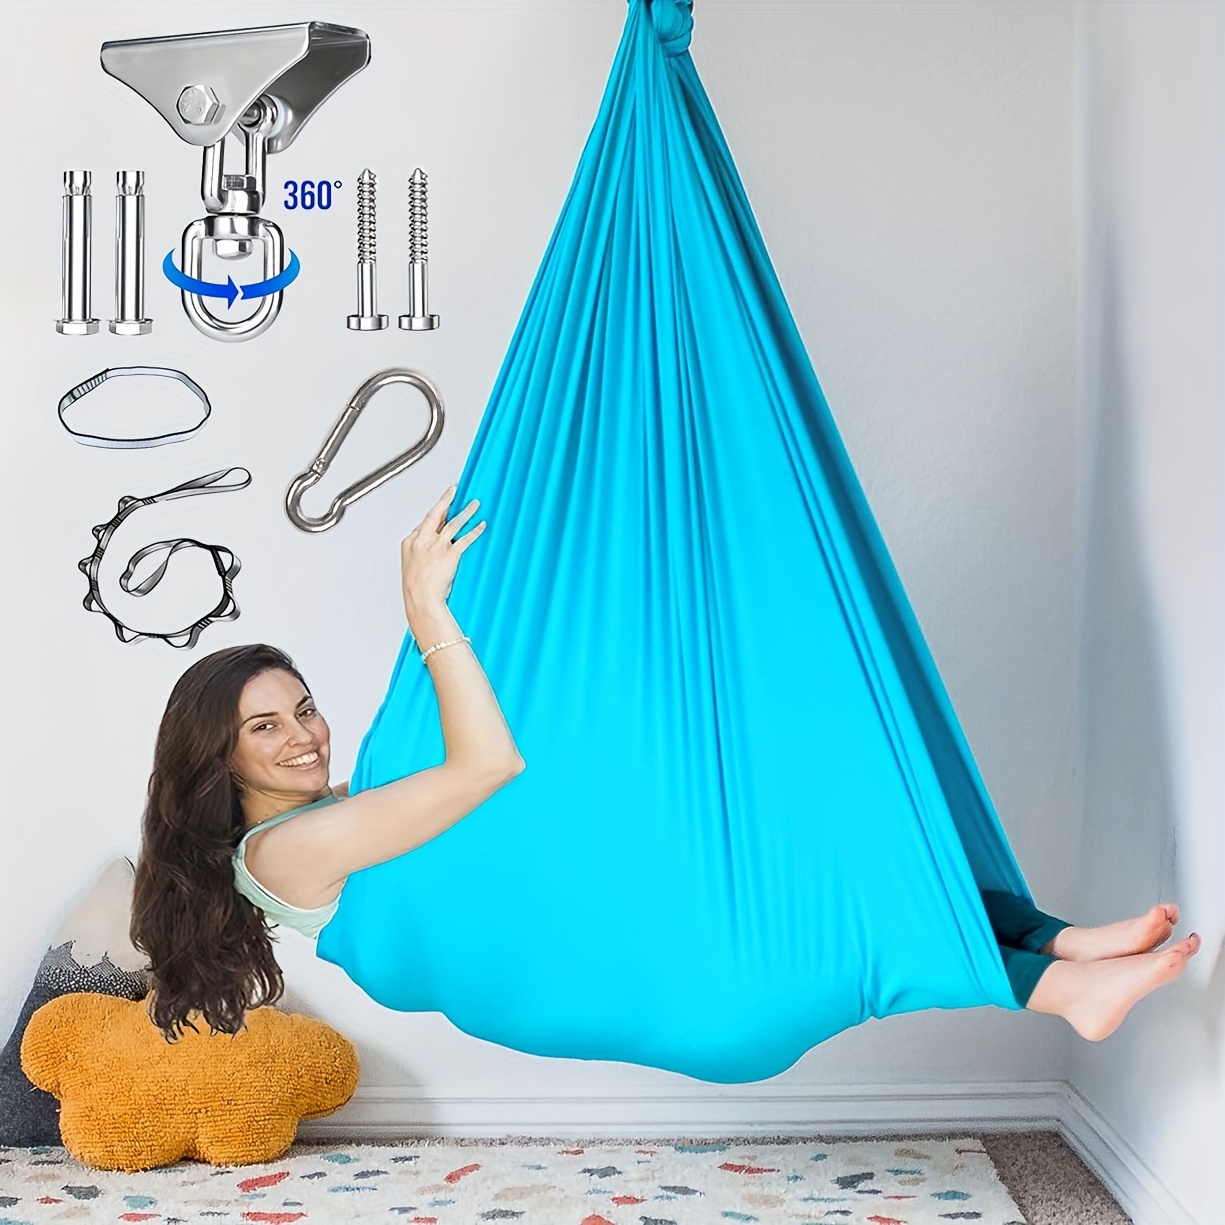 

Complete Yoga Hammock Swing Set With Hardware - Elastic Fabric, Aerial Silks For Indoor/outdoor Use - Perfect For Yoga, Camping & Picnics, Machine Washable, 110x59 Inches